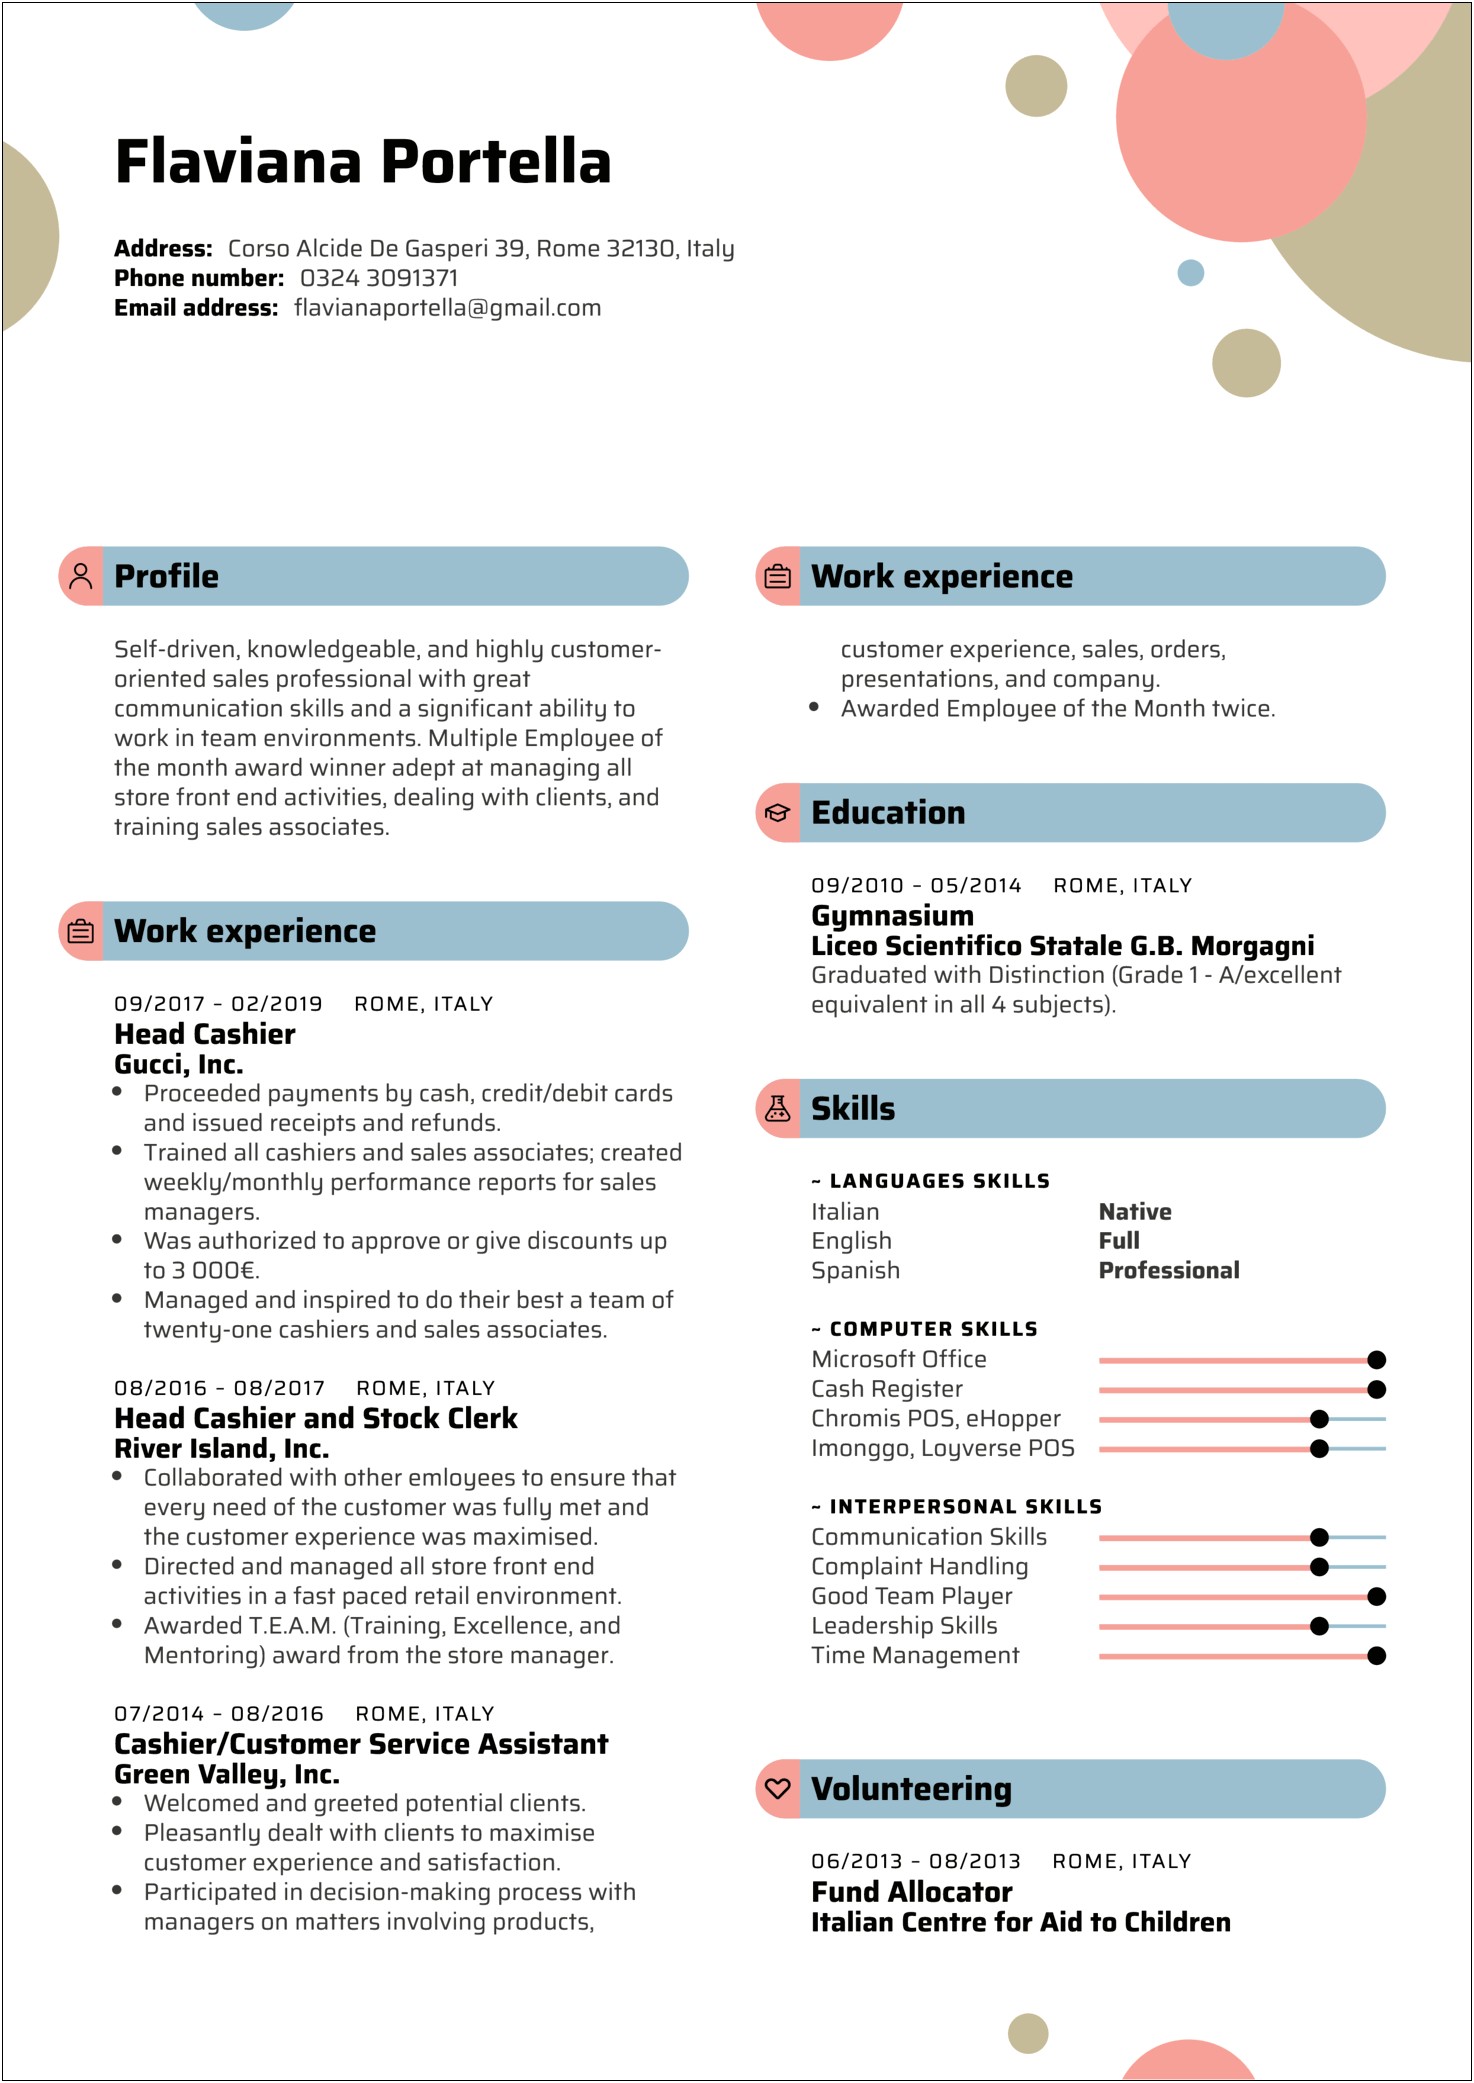 Sample Resume For Customer Service And Cashier